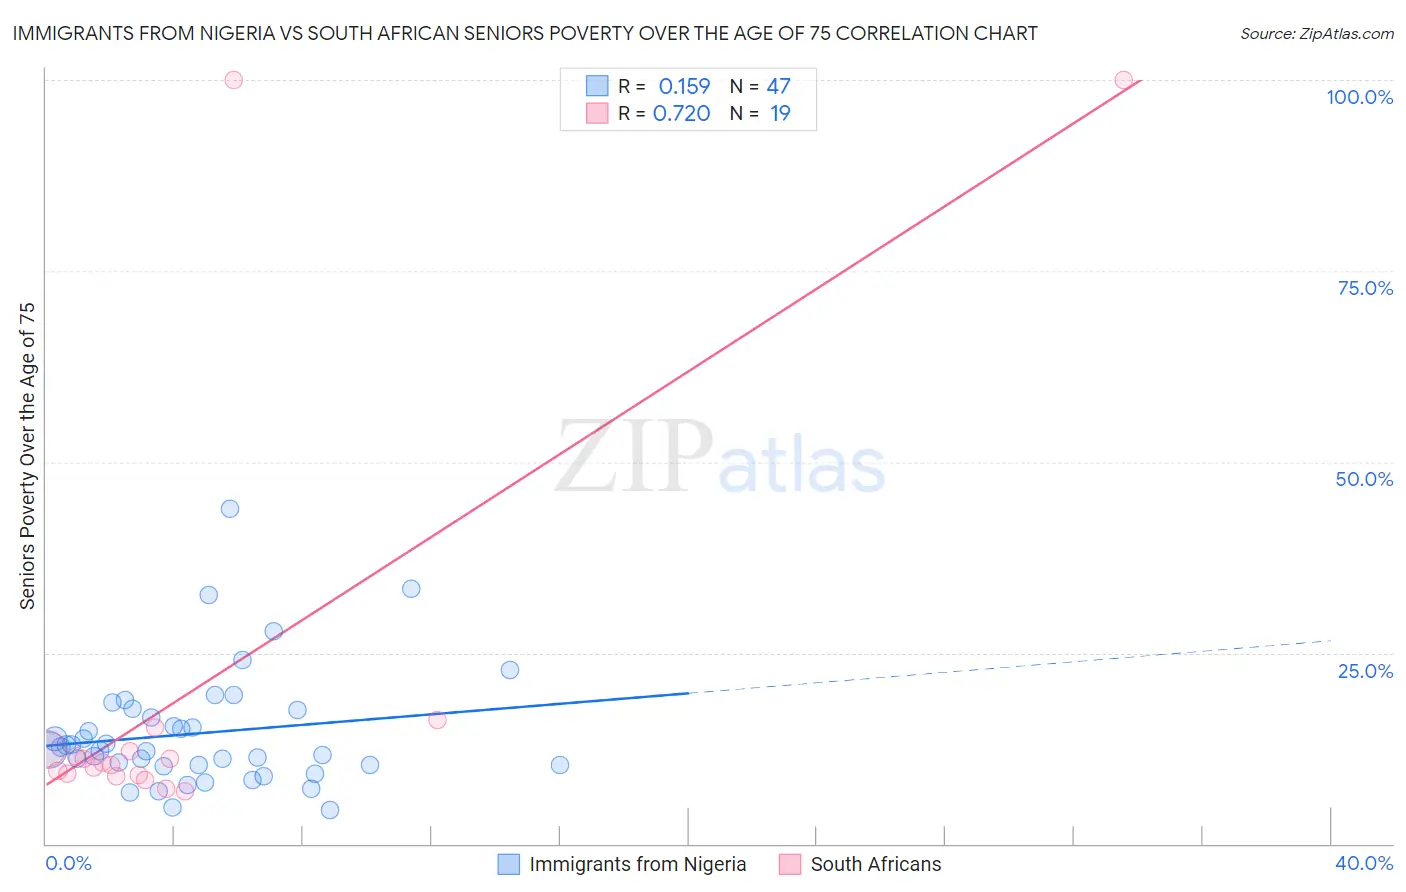 Immigrants from Nigeria vs South African Seniors Poverty Over the Age of 75